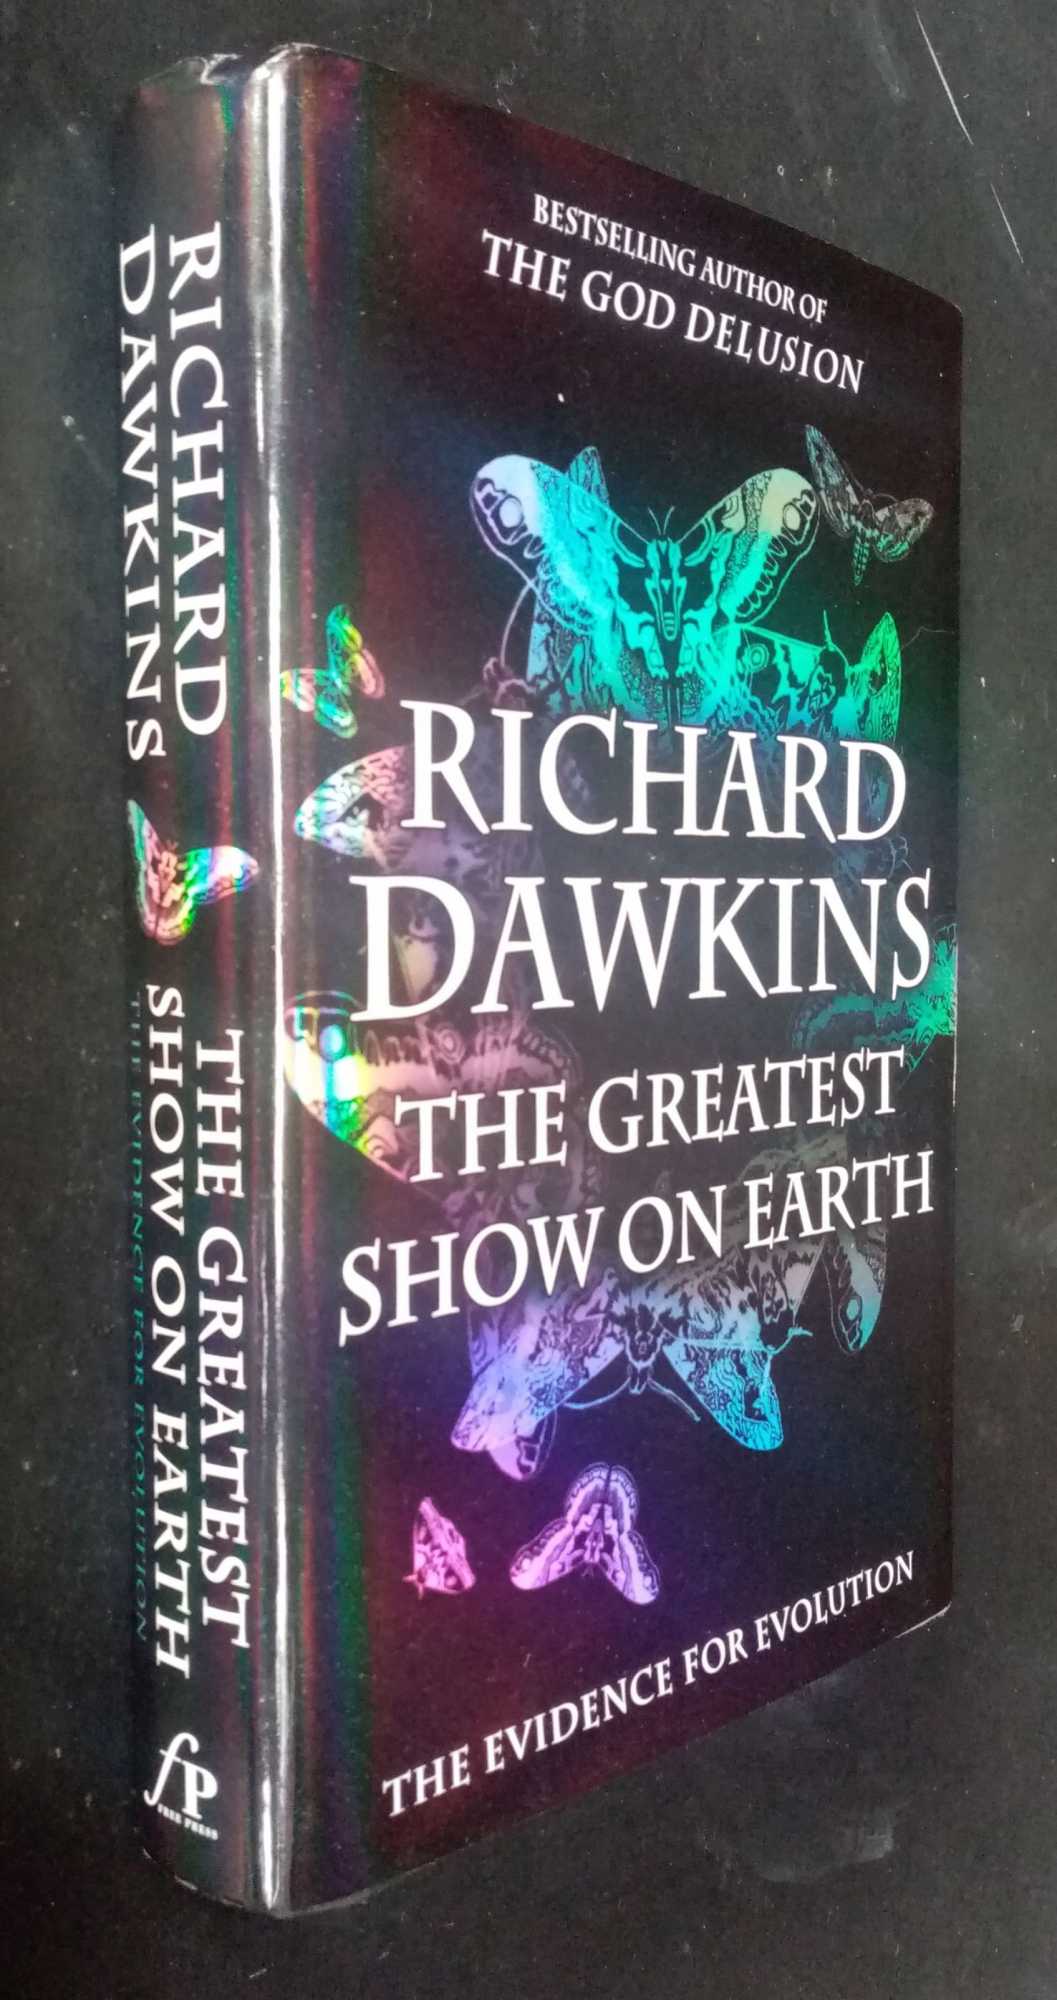 Richard Dawkins - The Greatest Show on Earth: The Evidence for Evolution. SIGNED